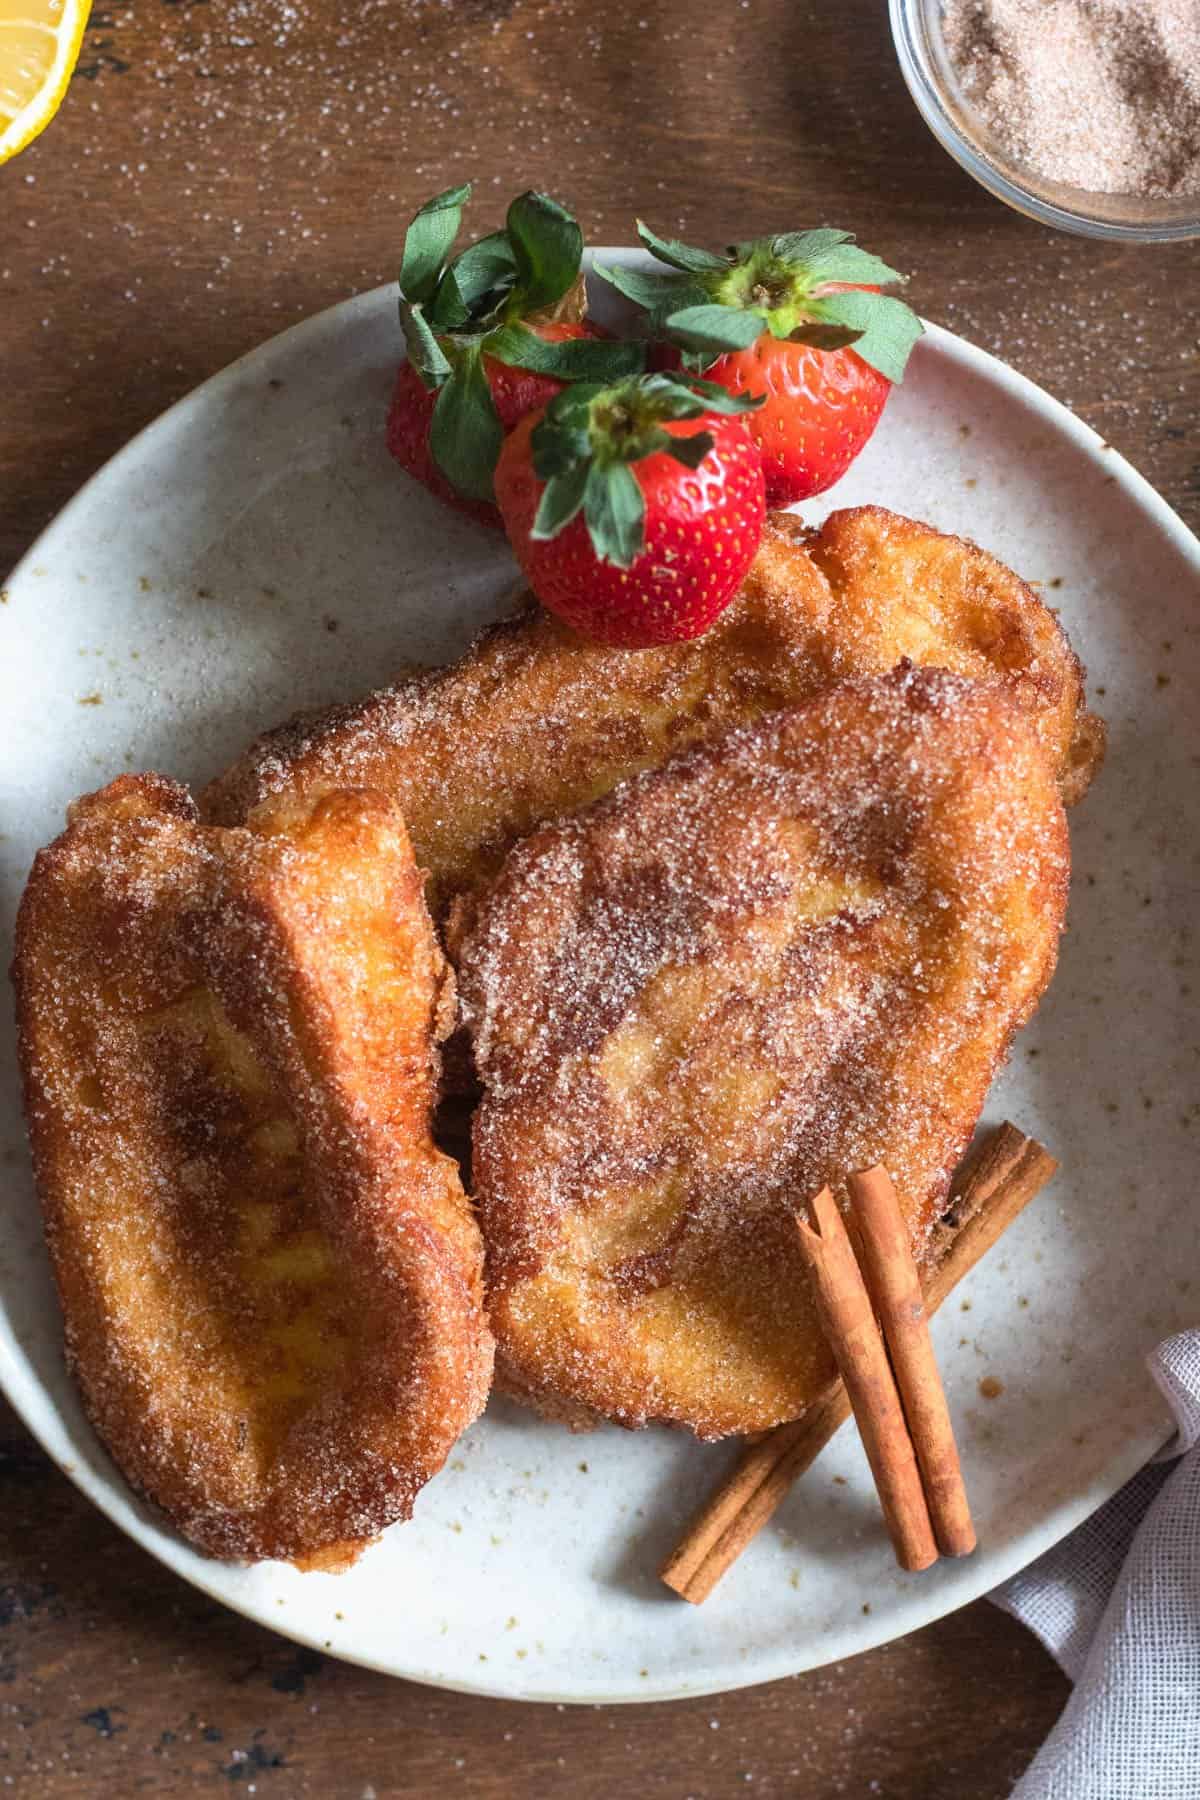 A plate with a couple Torrijas and 3 whole strawberries on the side and 2 cinnamon sticks garnishing the plate. .